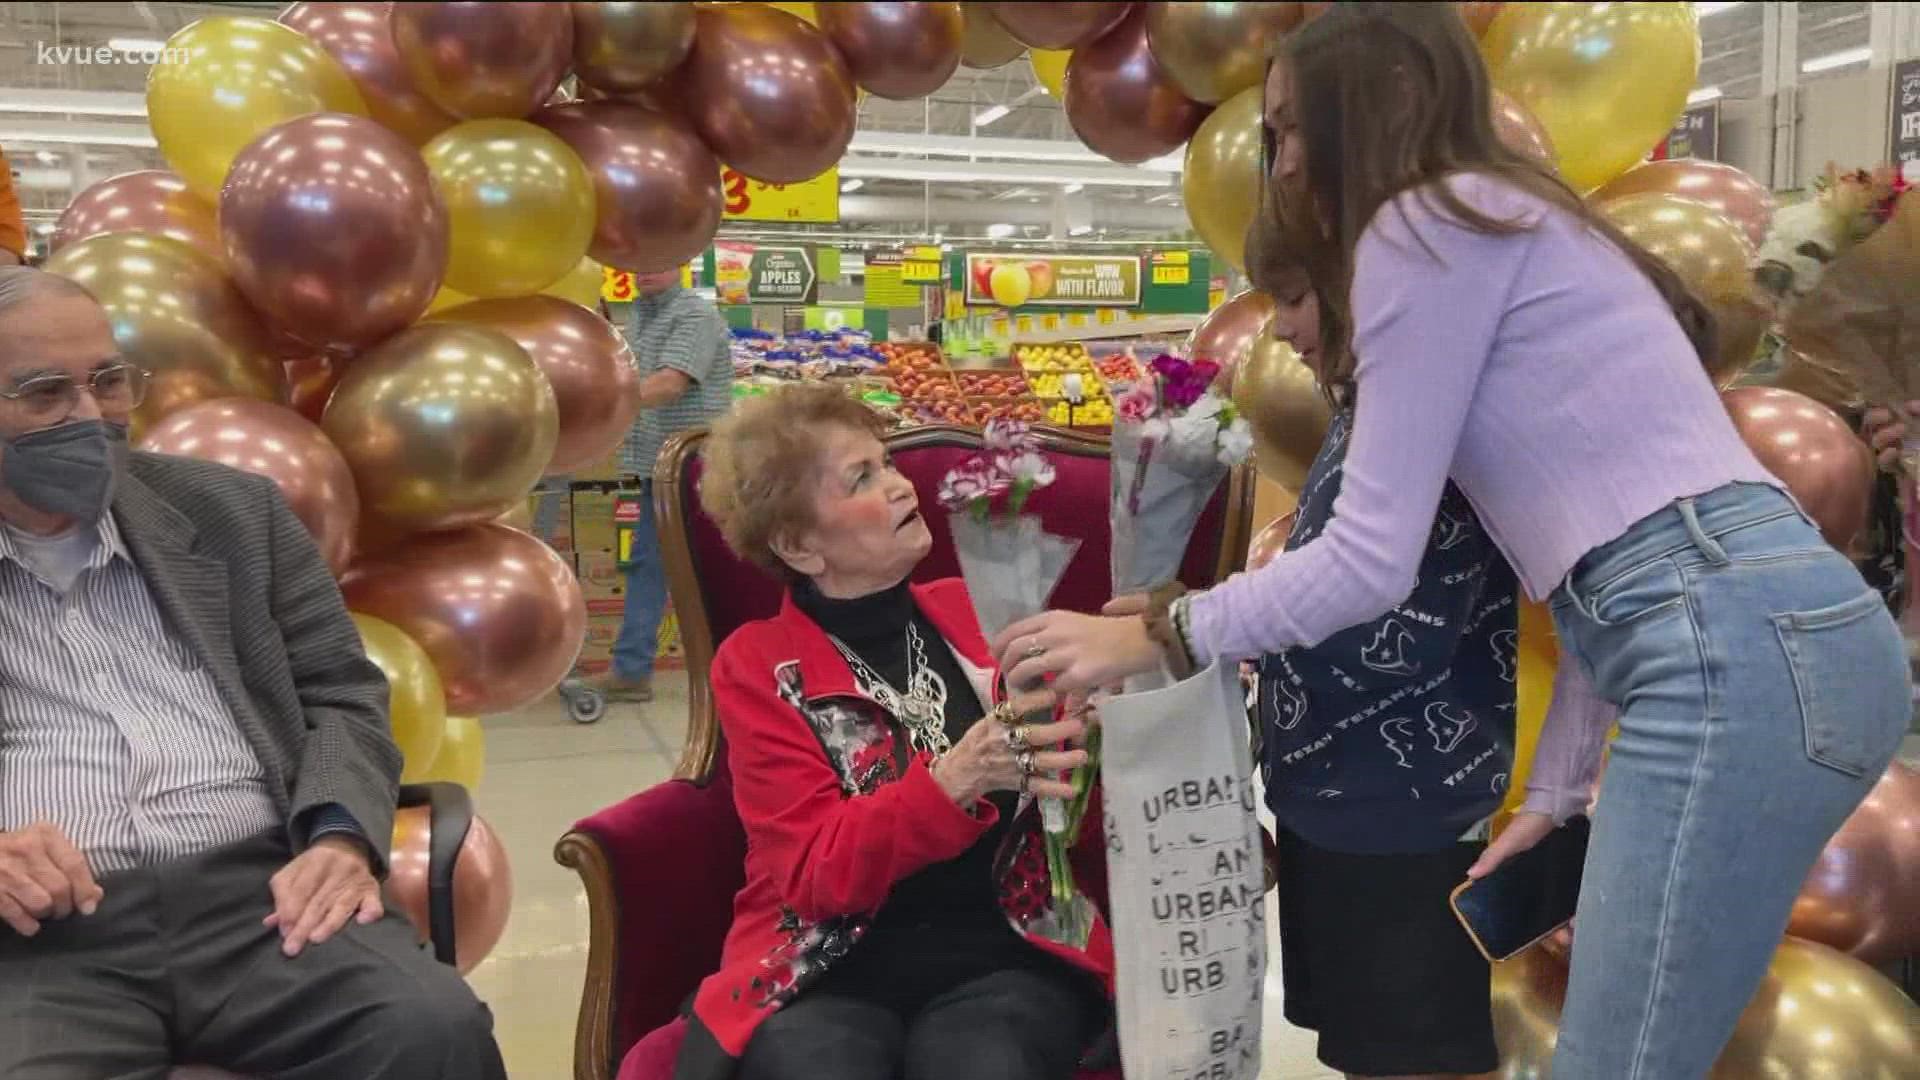 H-E-B celebrated its longest-serving employee, Ofelia "Ophie" Garcia. She has worked at H-E-B for 56 years.